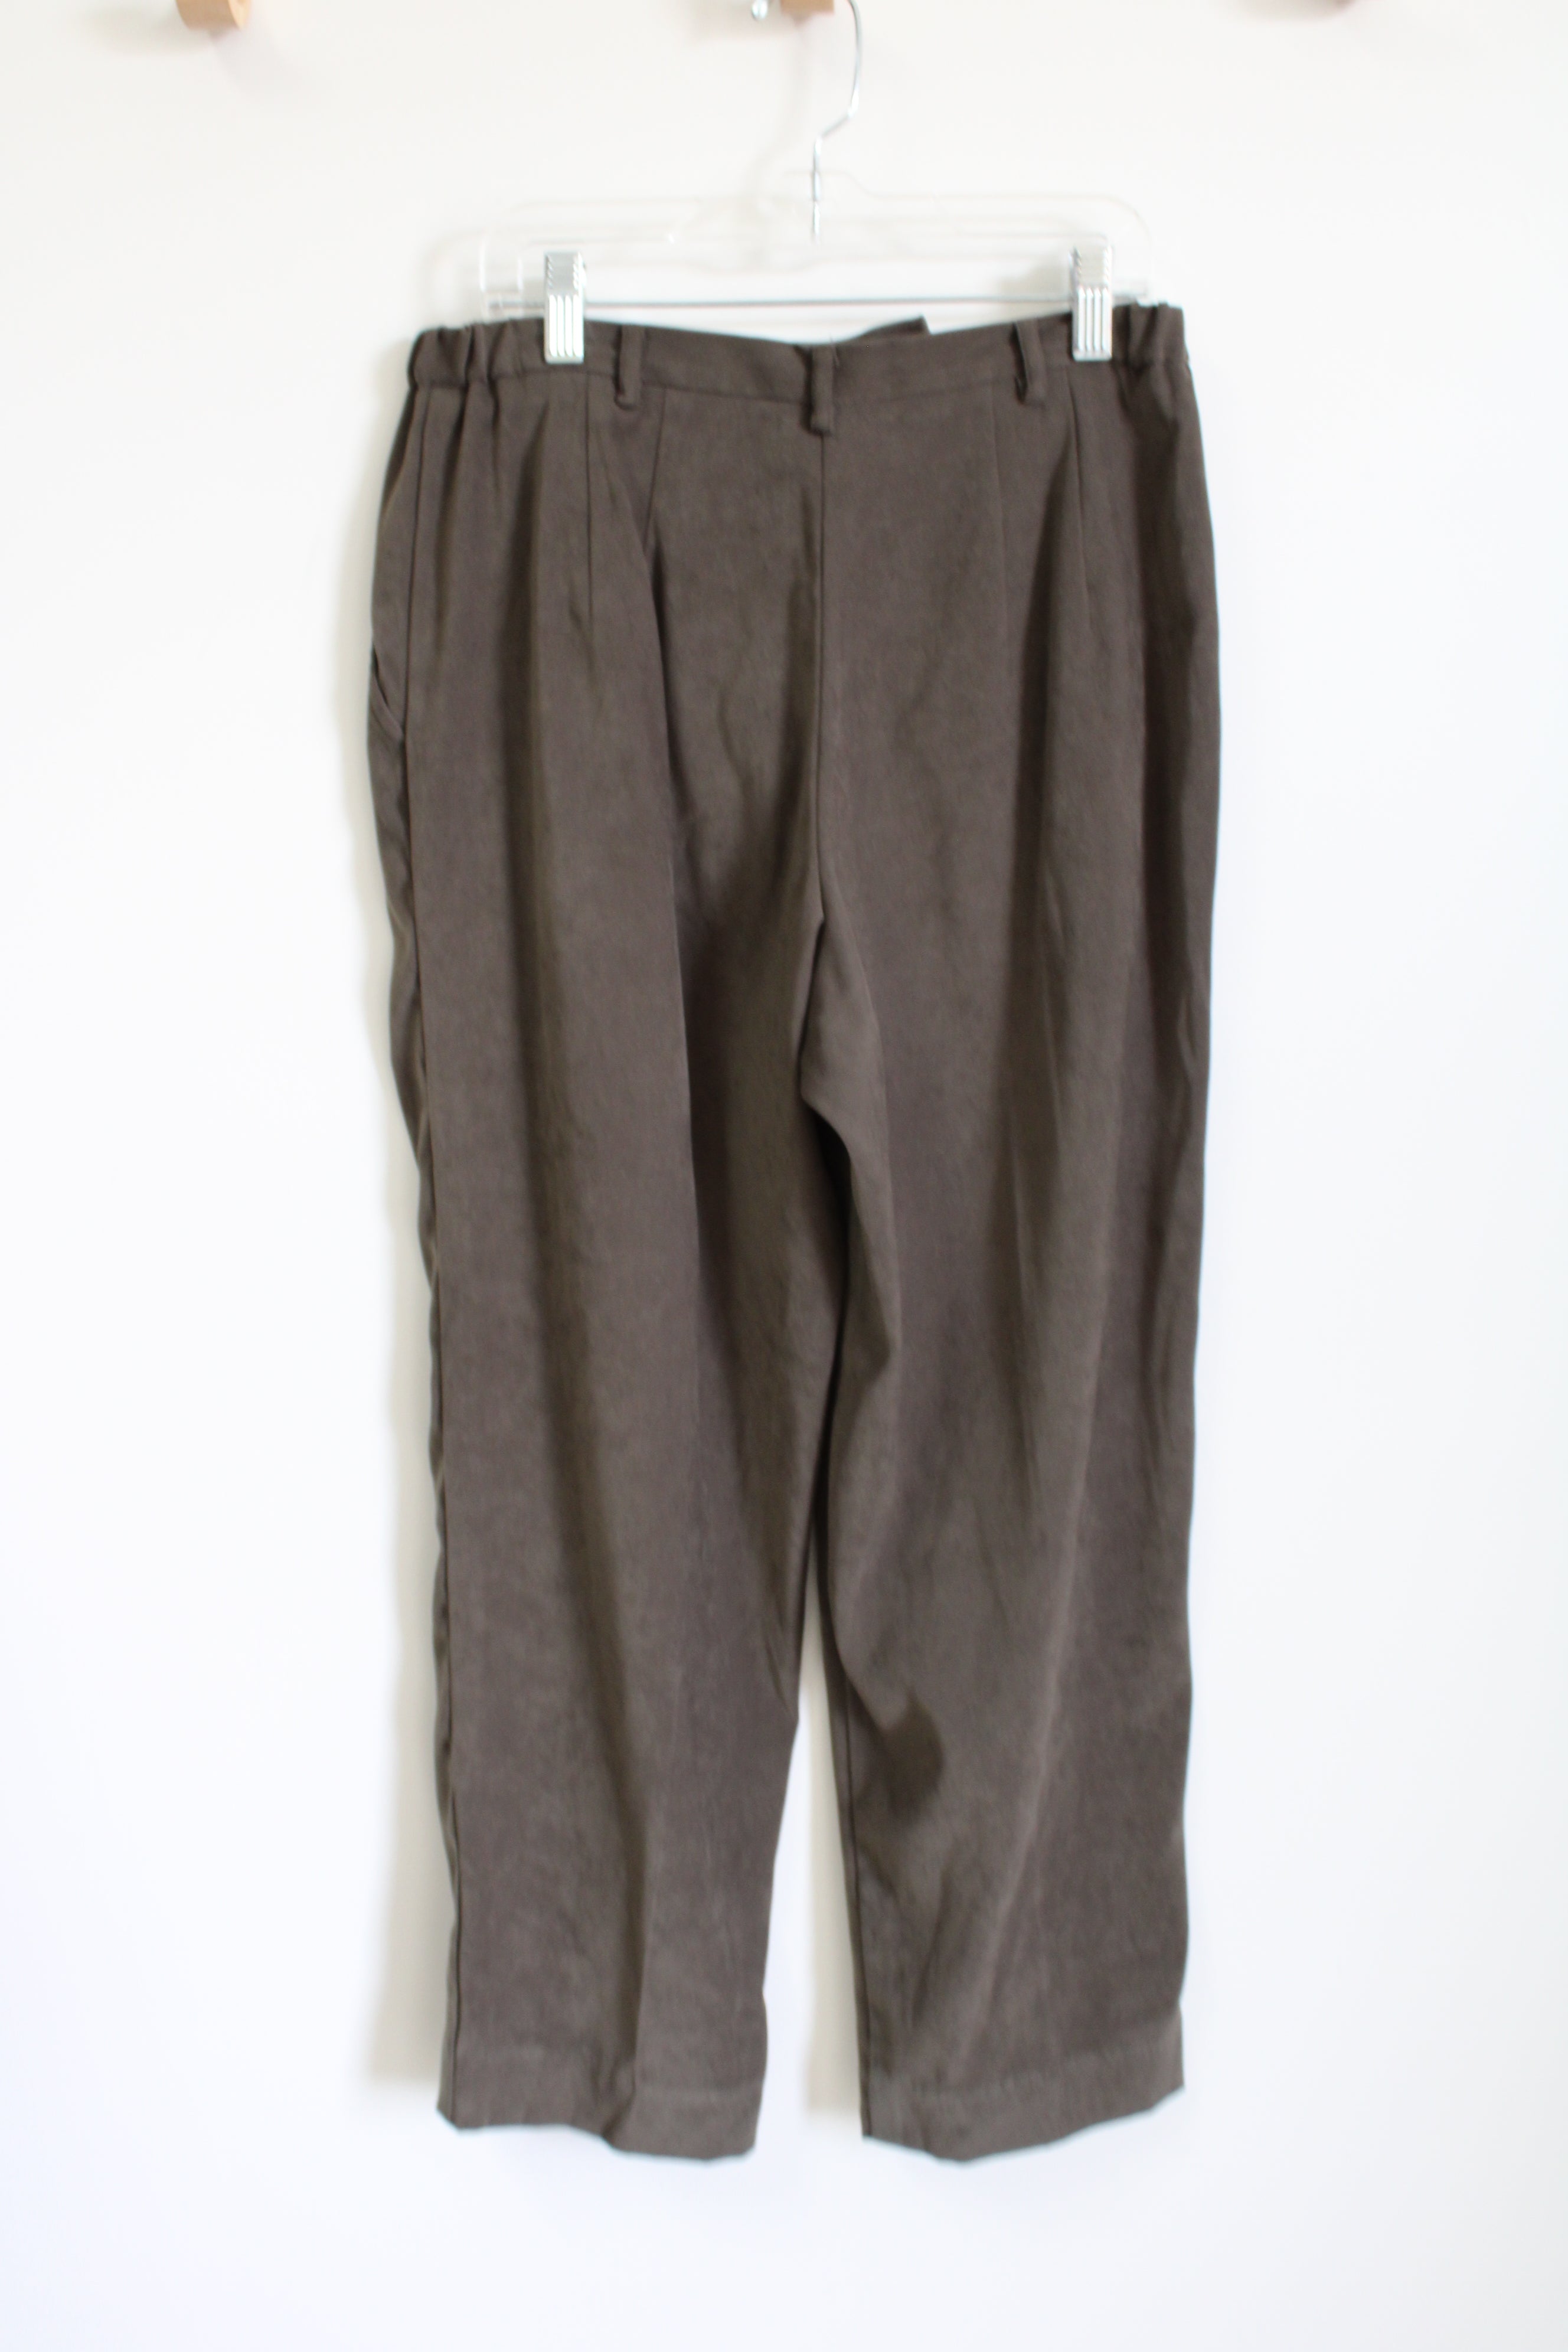 Coldwater Creek Olive Green Sueded Trouser Pant | 10 Petite